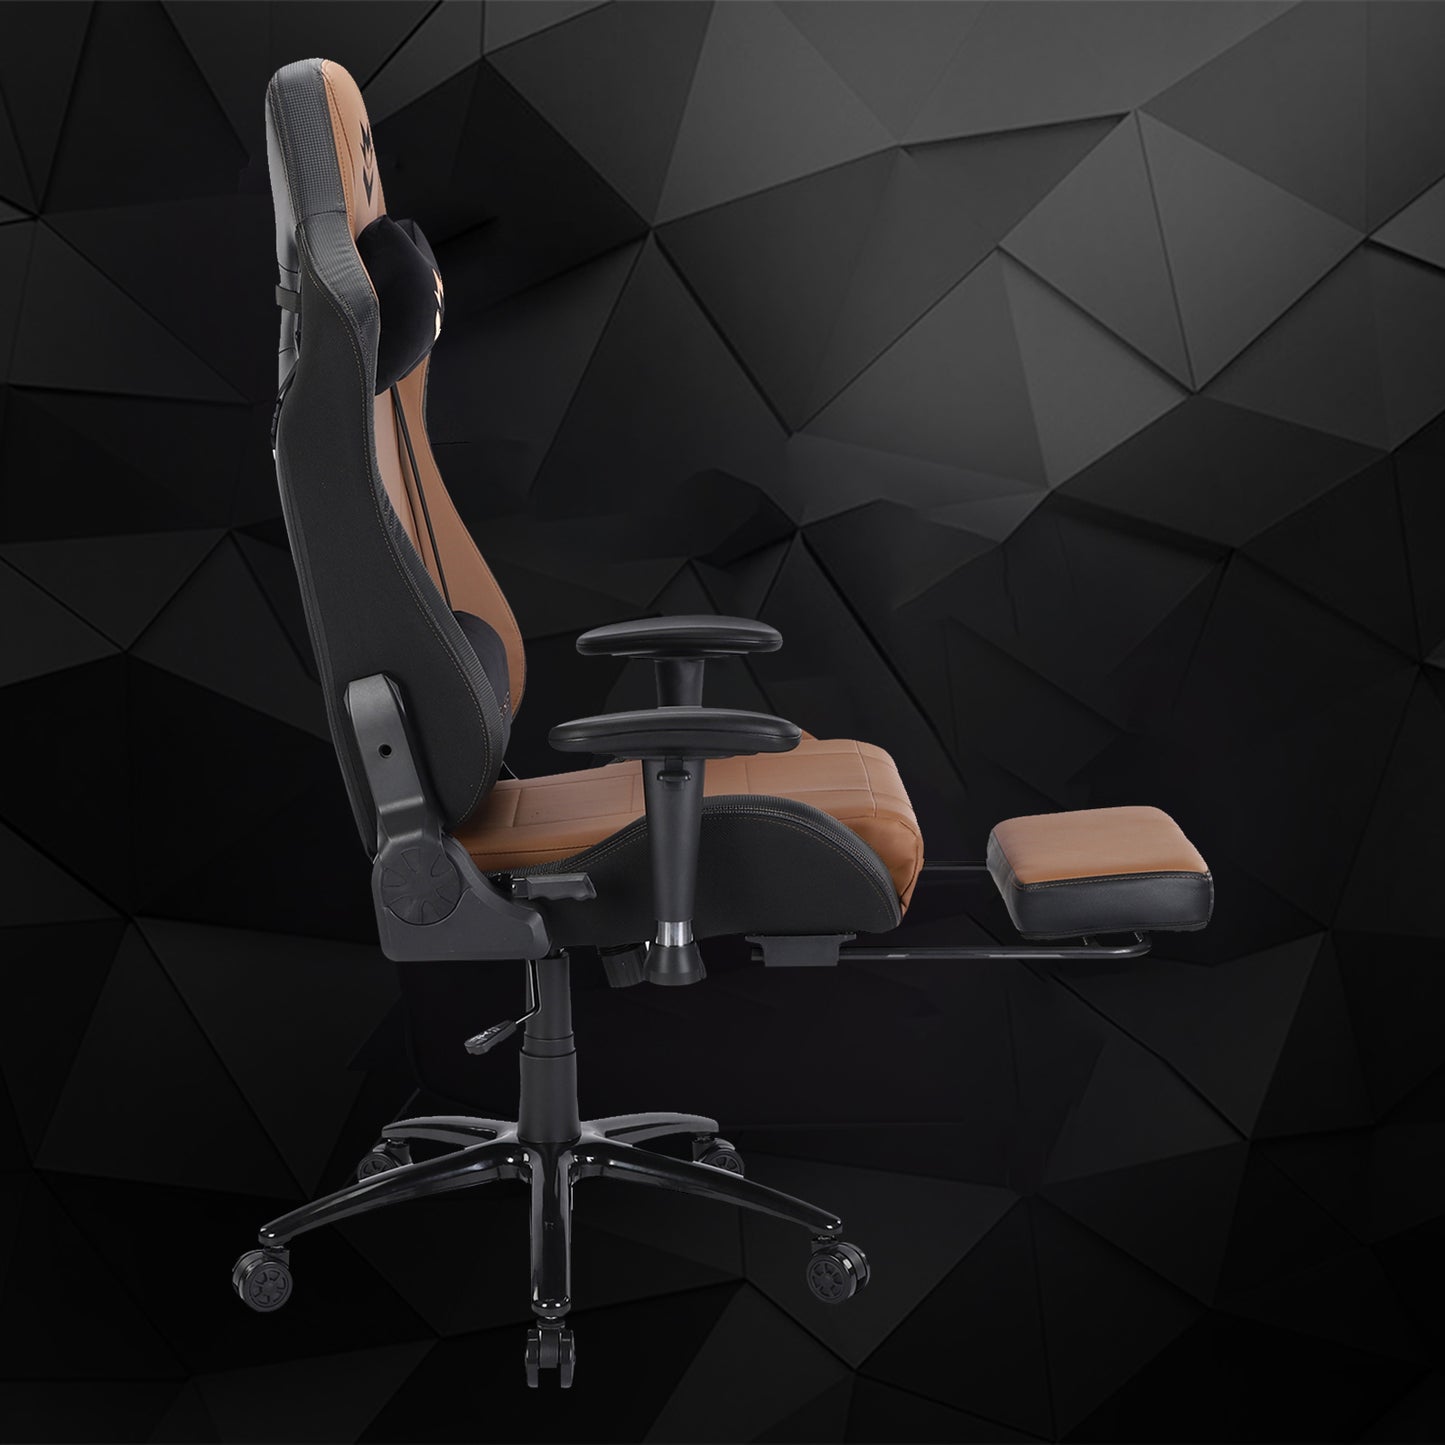 Ryder Pro Gaming Chair - Brown